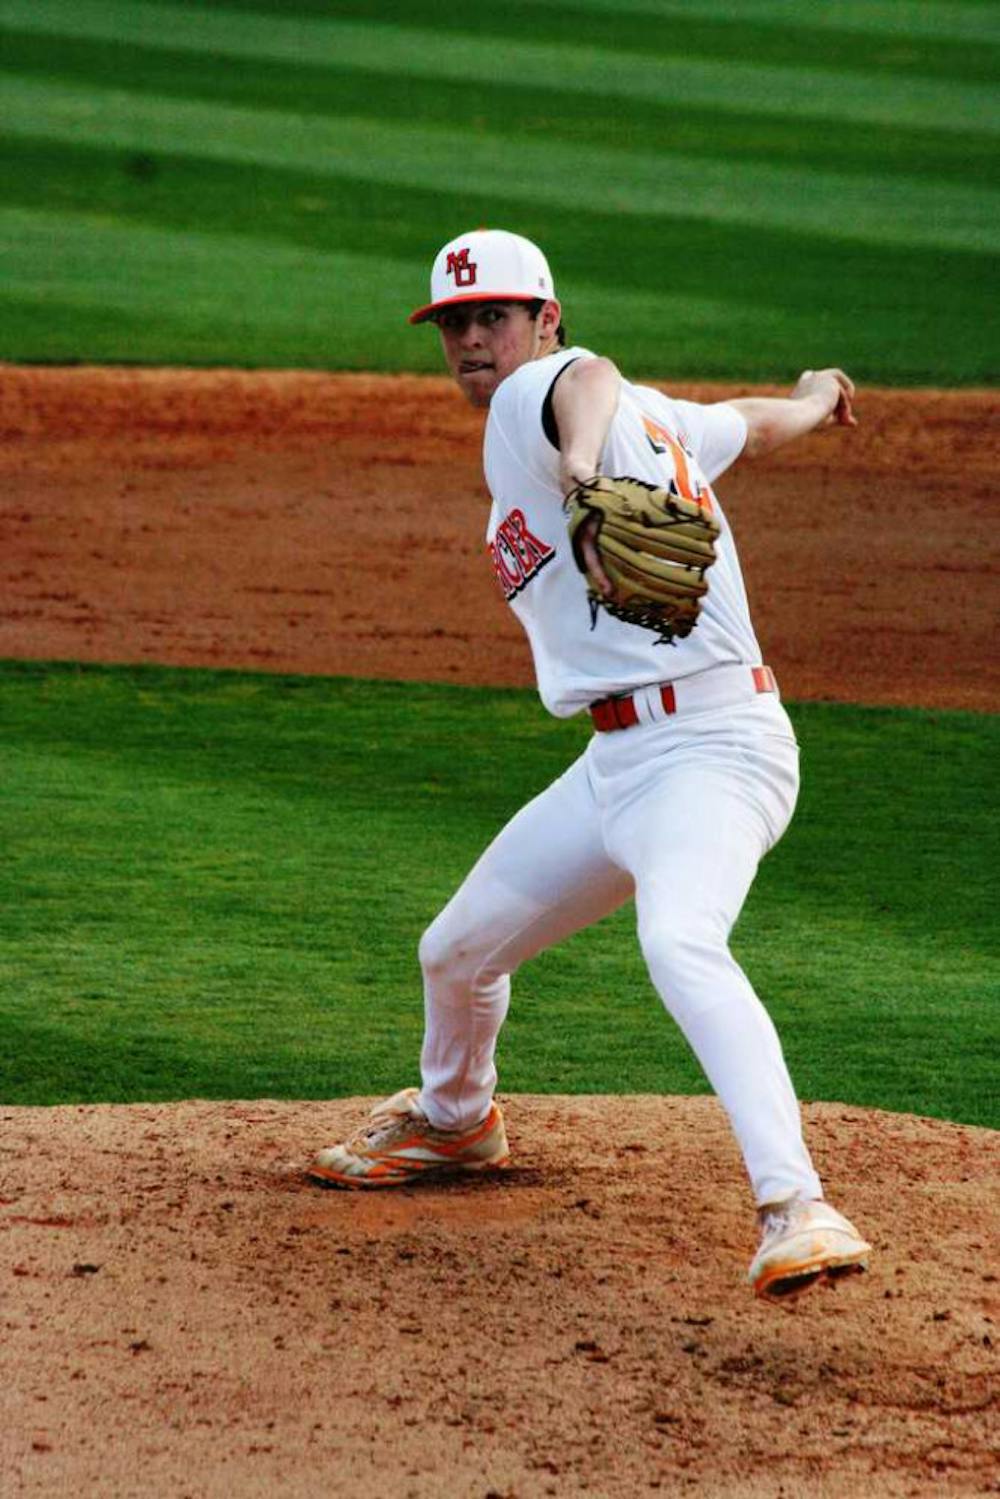 (photo courtesy of MercerBears.com) While the offensive numbers have been off of the charts, the consisent pitching has helped propel Mercer to a fast start.